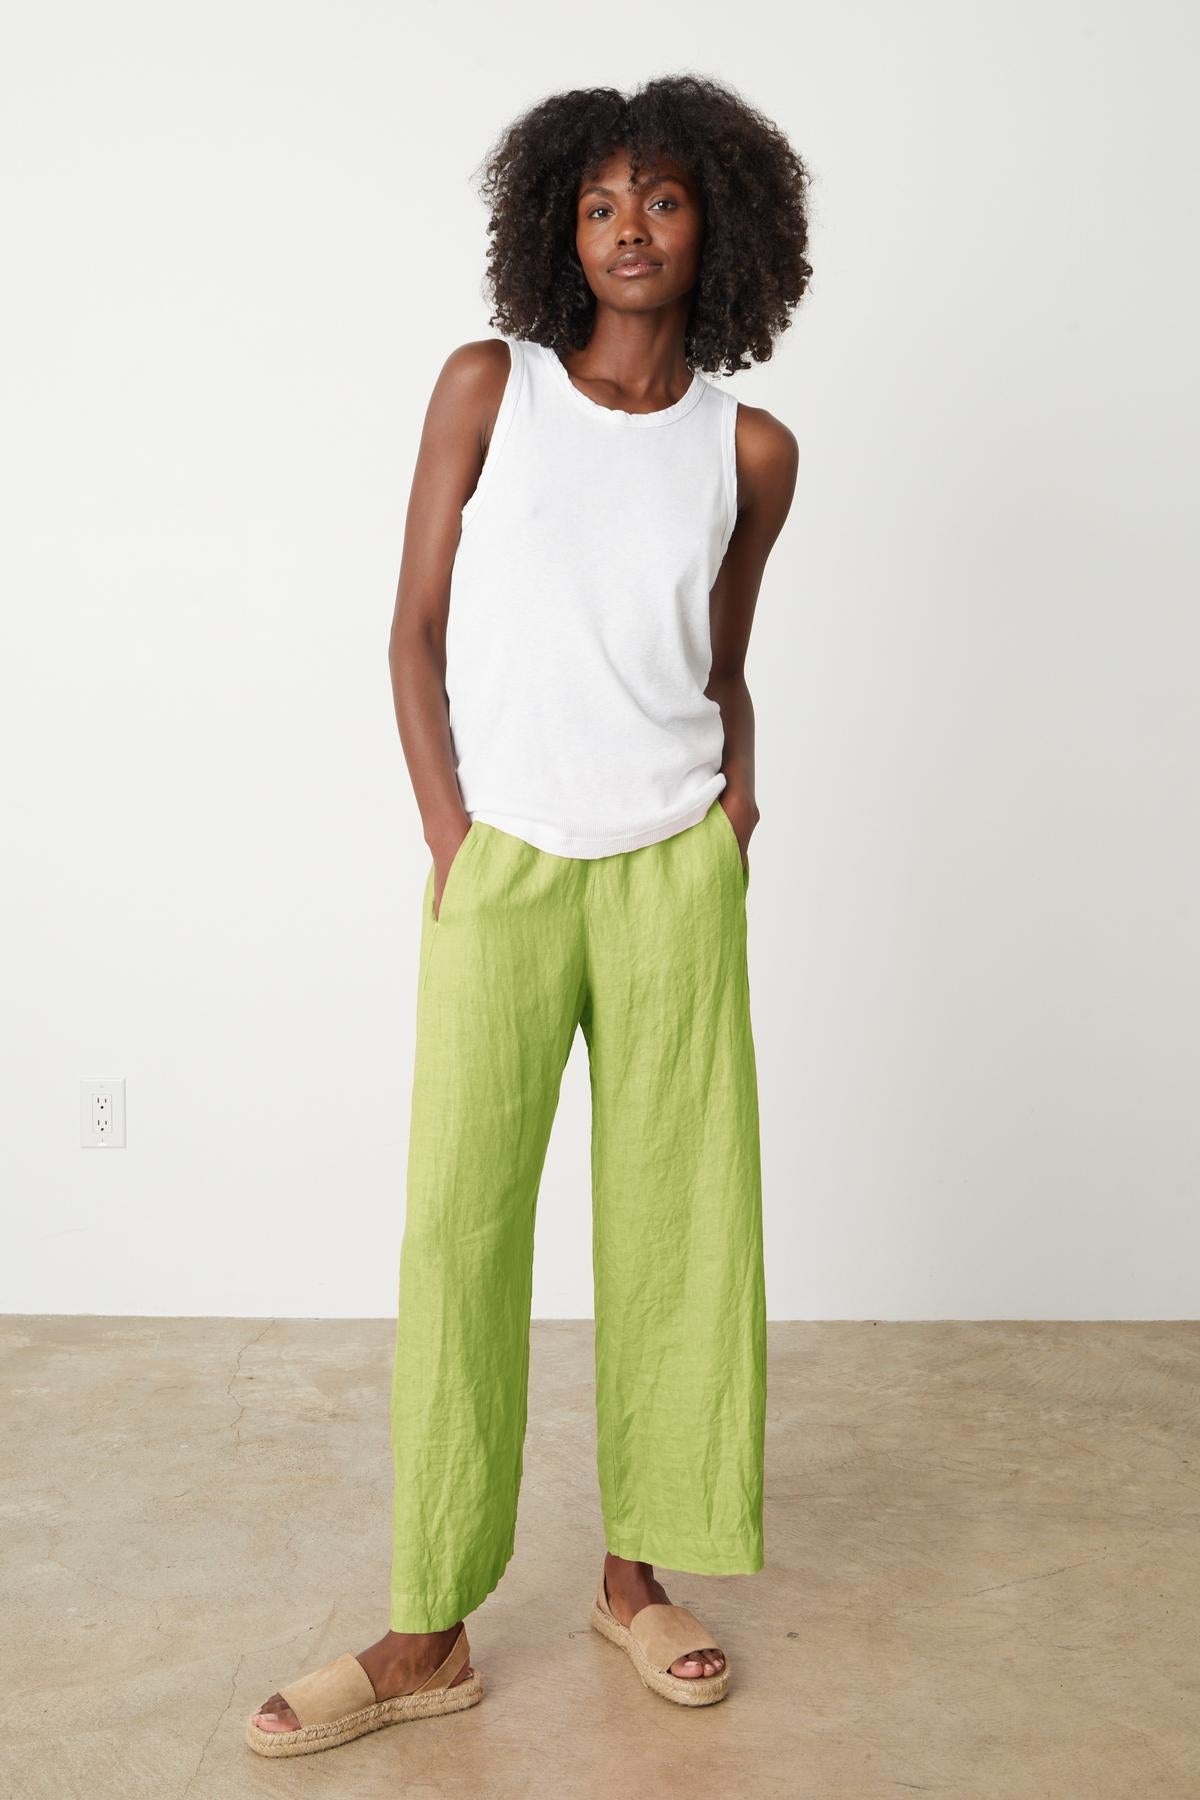 Lola pant in kiwi green colored linen with Maxie tank in white full length front-35206341820609